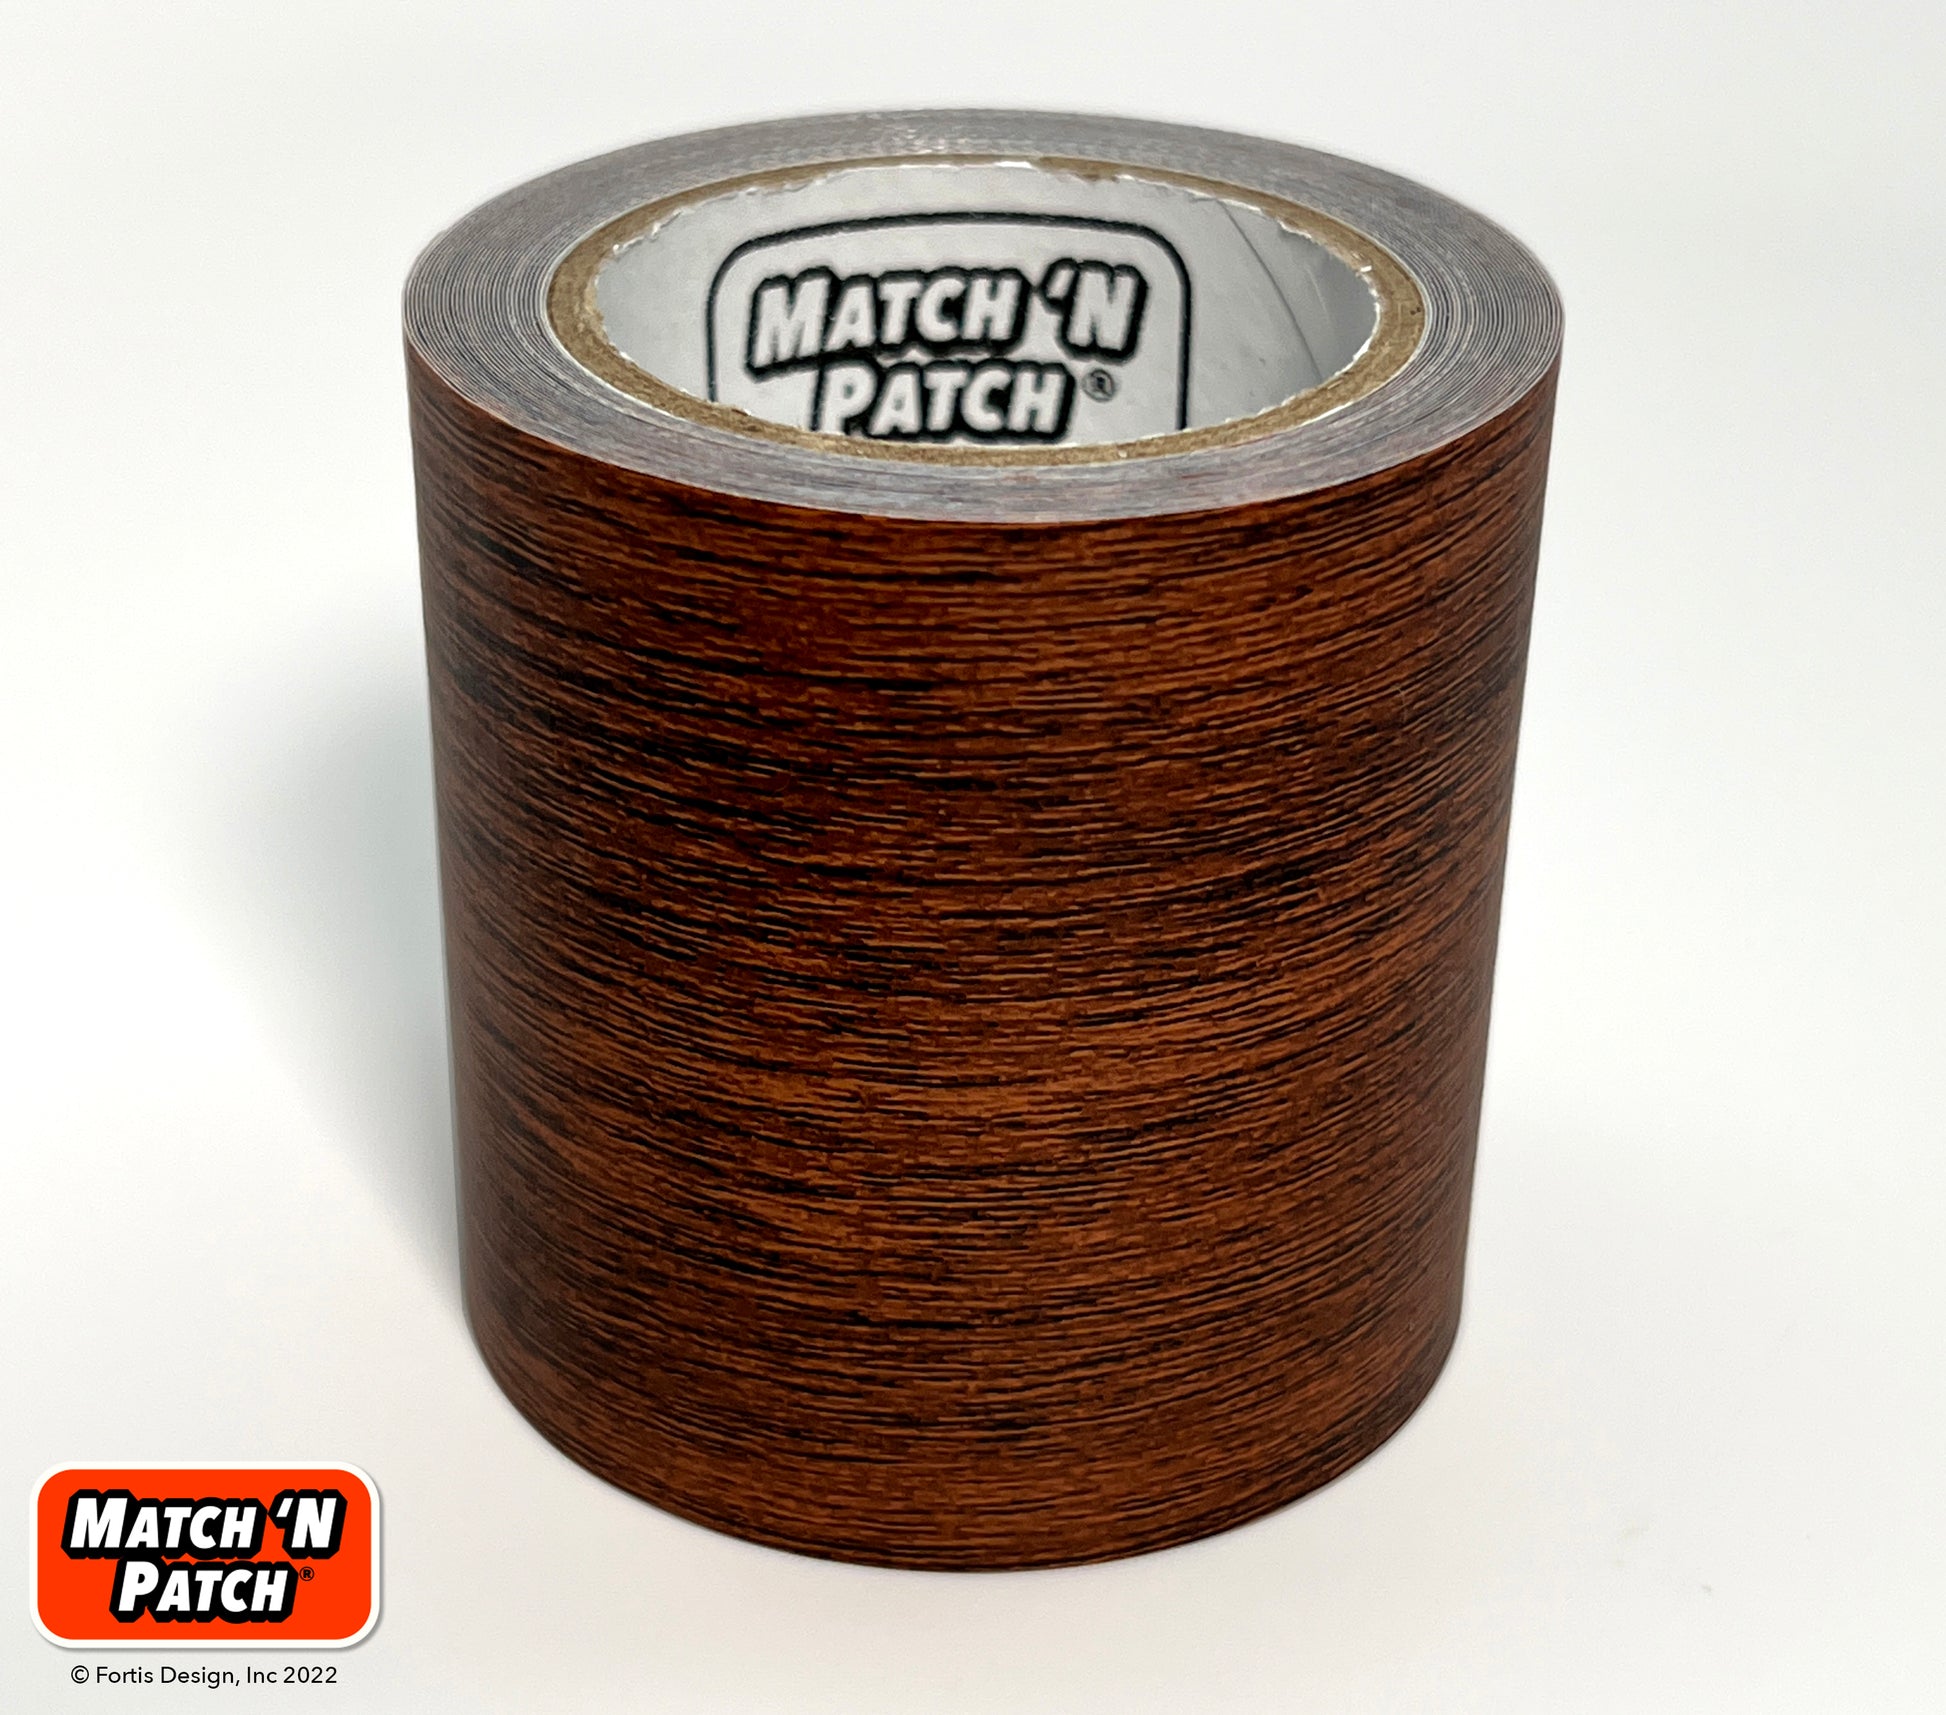  MATCH 'N PATCH Realistic Leather Repair Tape, Brown